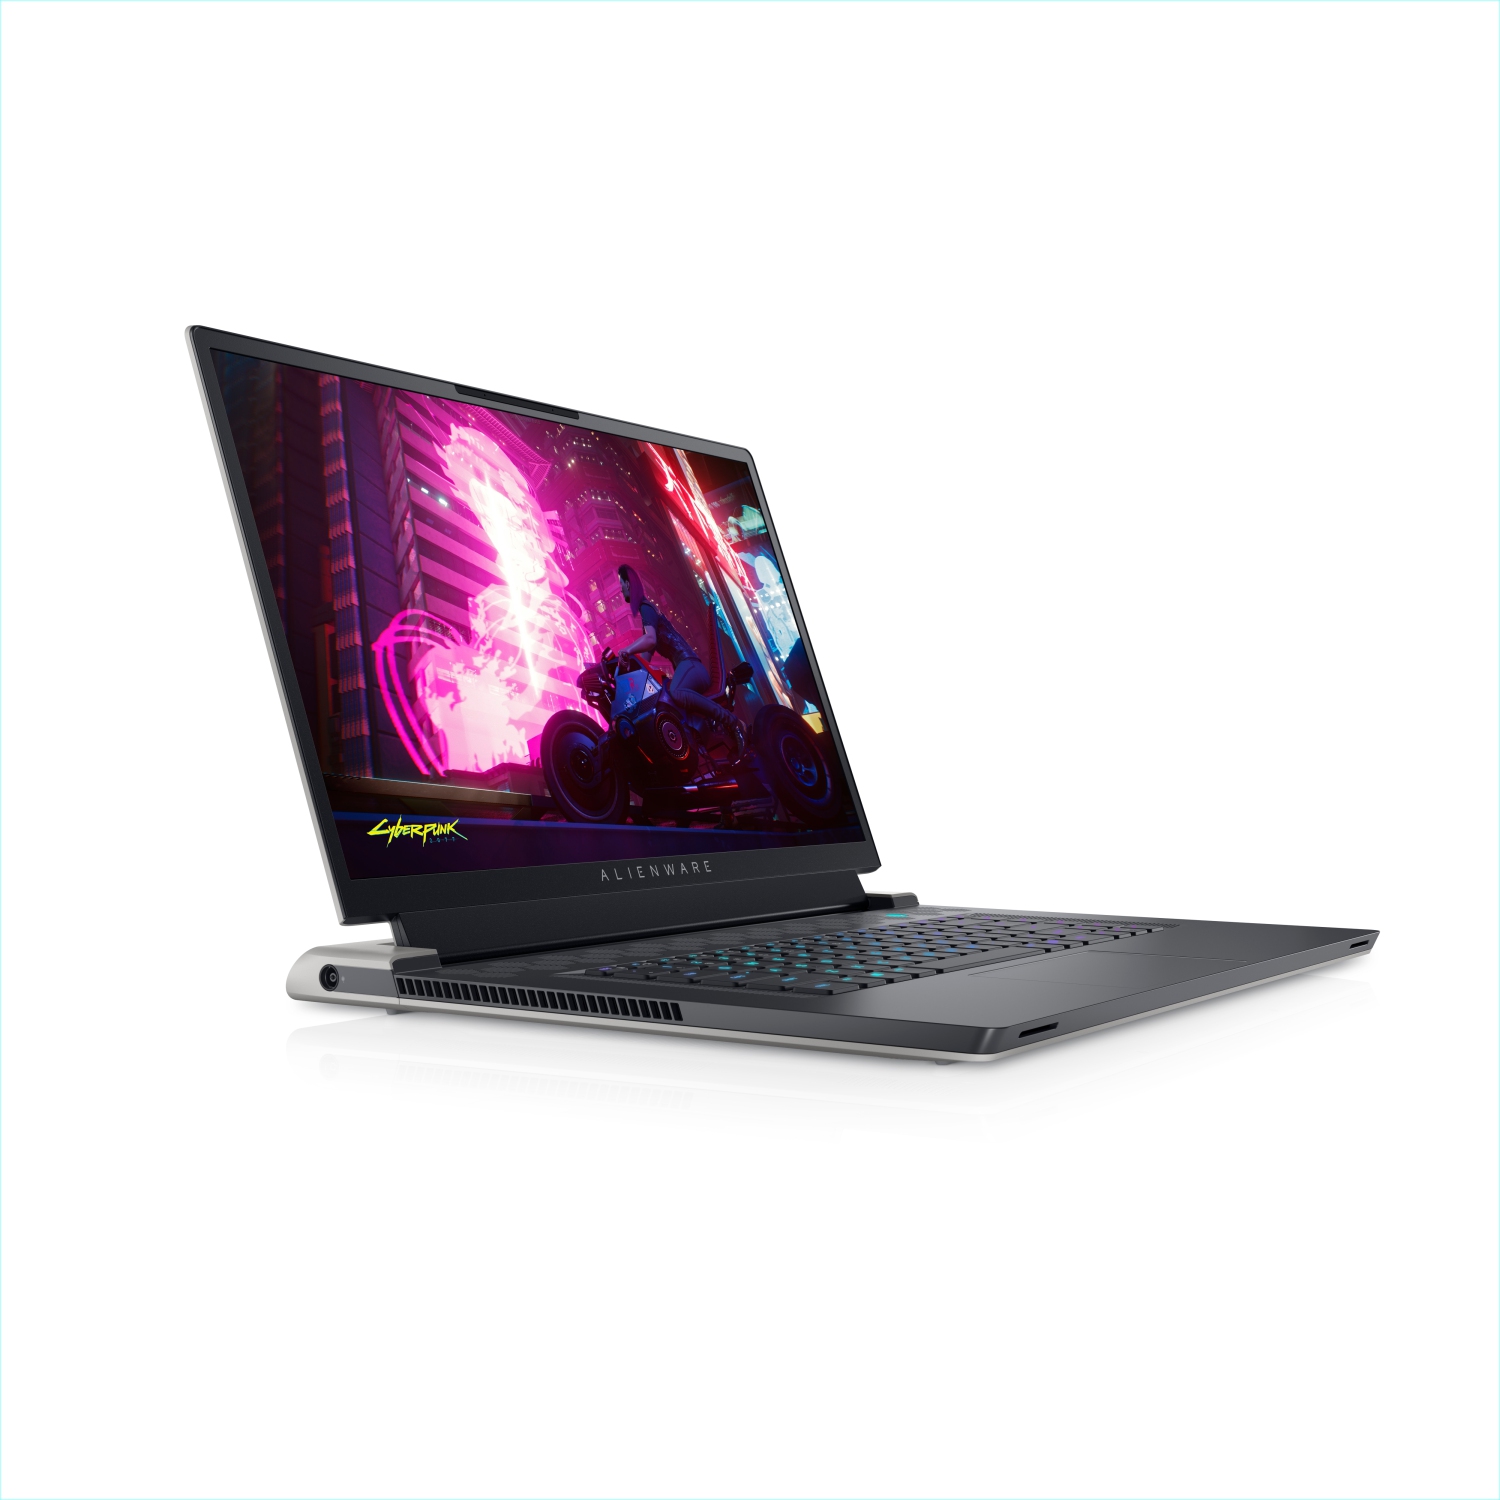 Refurbished (Excellent) - Dell Alienware X17 R1 Gaming Laptop (2021), 17.3" FHD, Core i7, 2TB SSD, 32GB RAM, RTX 3080, 8 Cores @ 4.6 GHz, 11th Gen CPU Certified